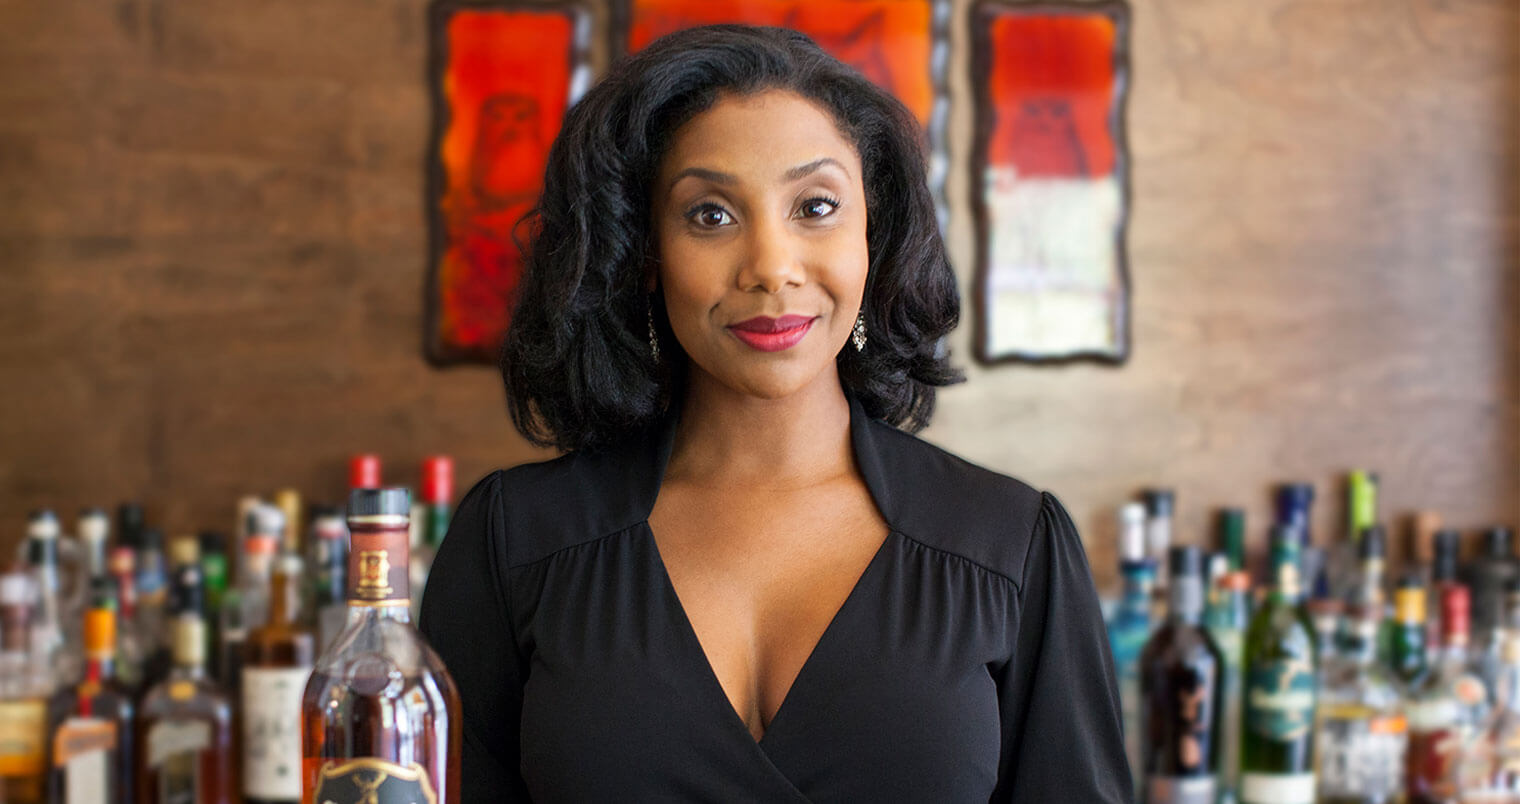 William Grant & Sons Appoints Tracie Franklin as Glenfiddich Ambassador, featured image